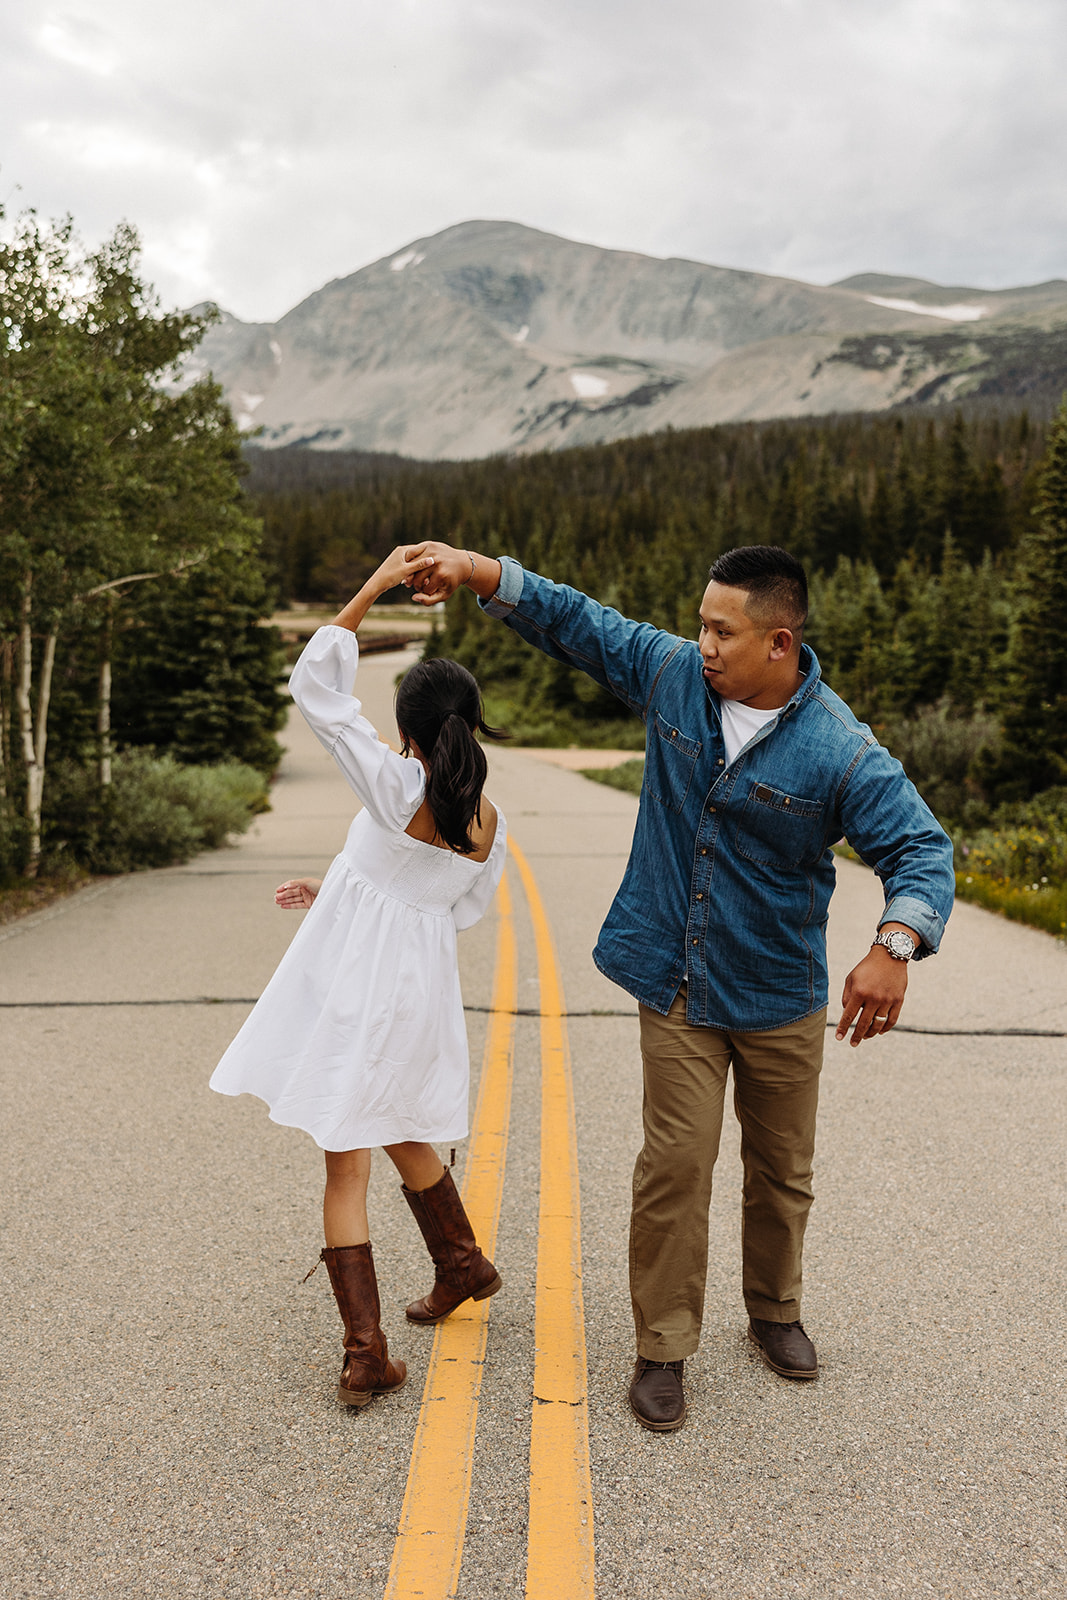 In the middle of the mountain road, the man holds his fiance's hand as she twirls under him in delight.